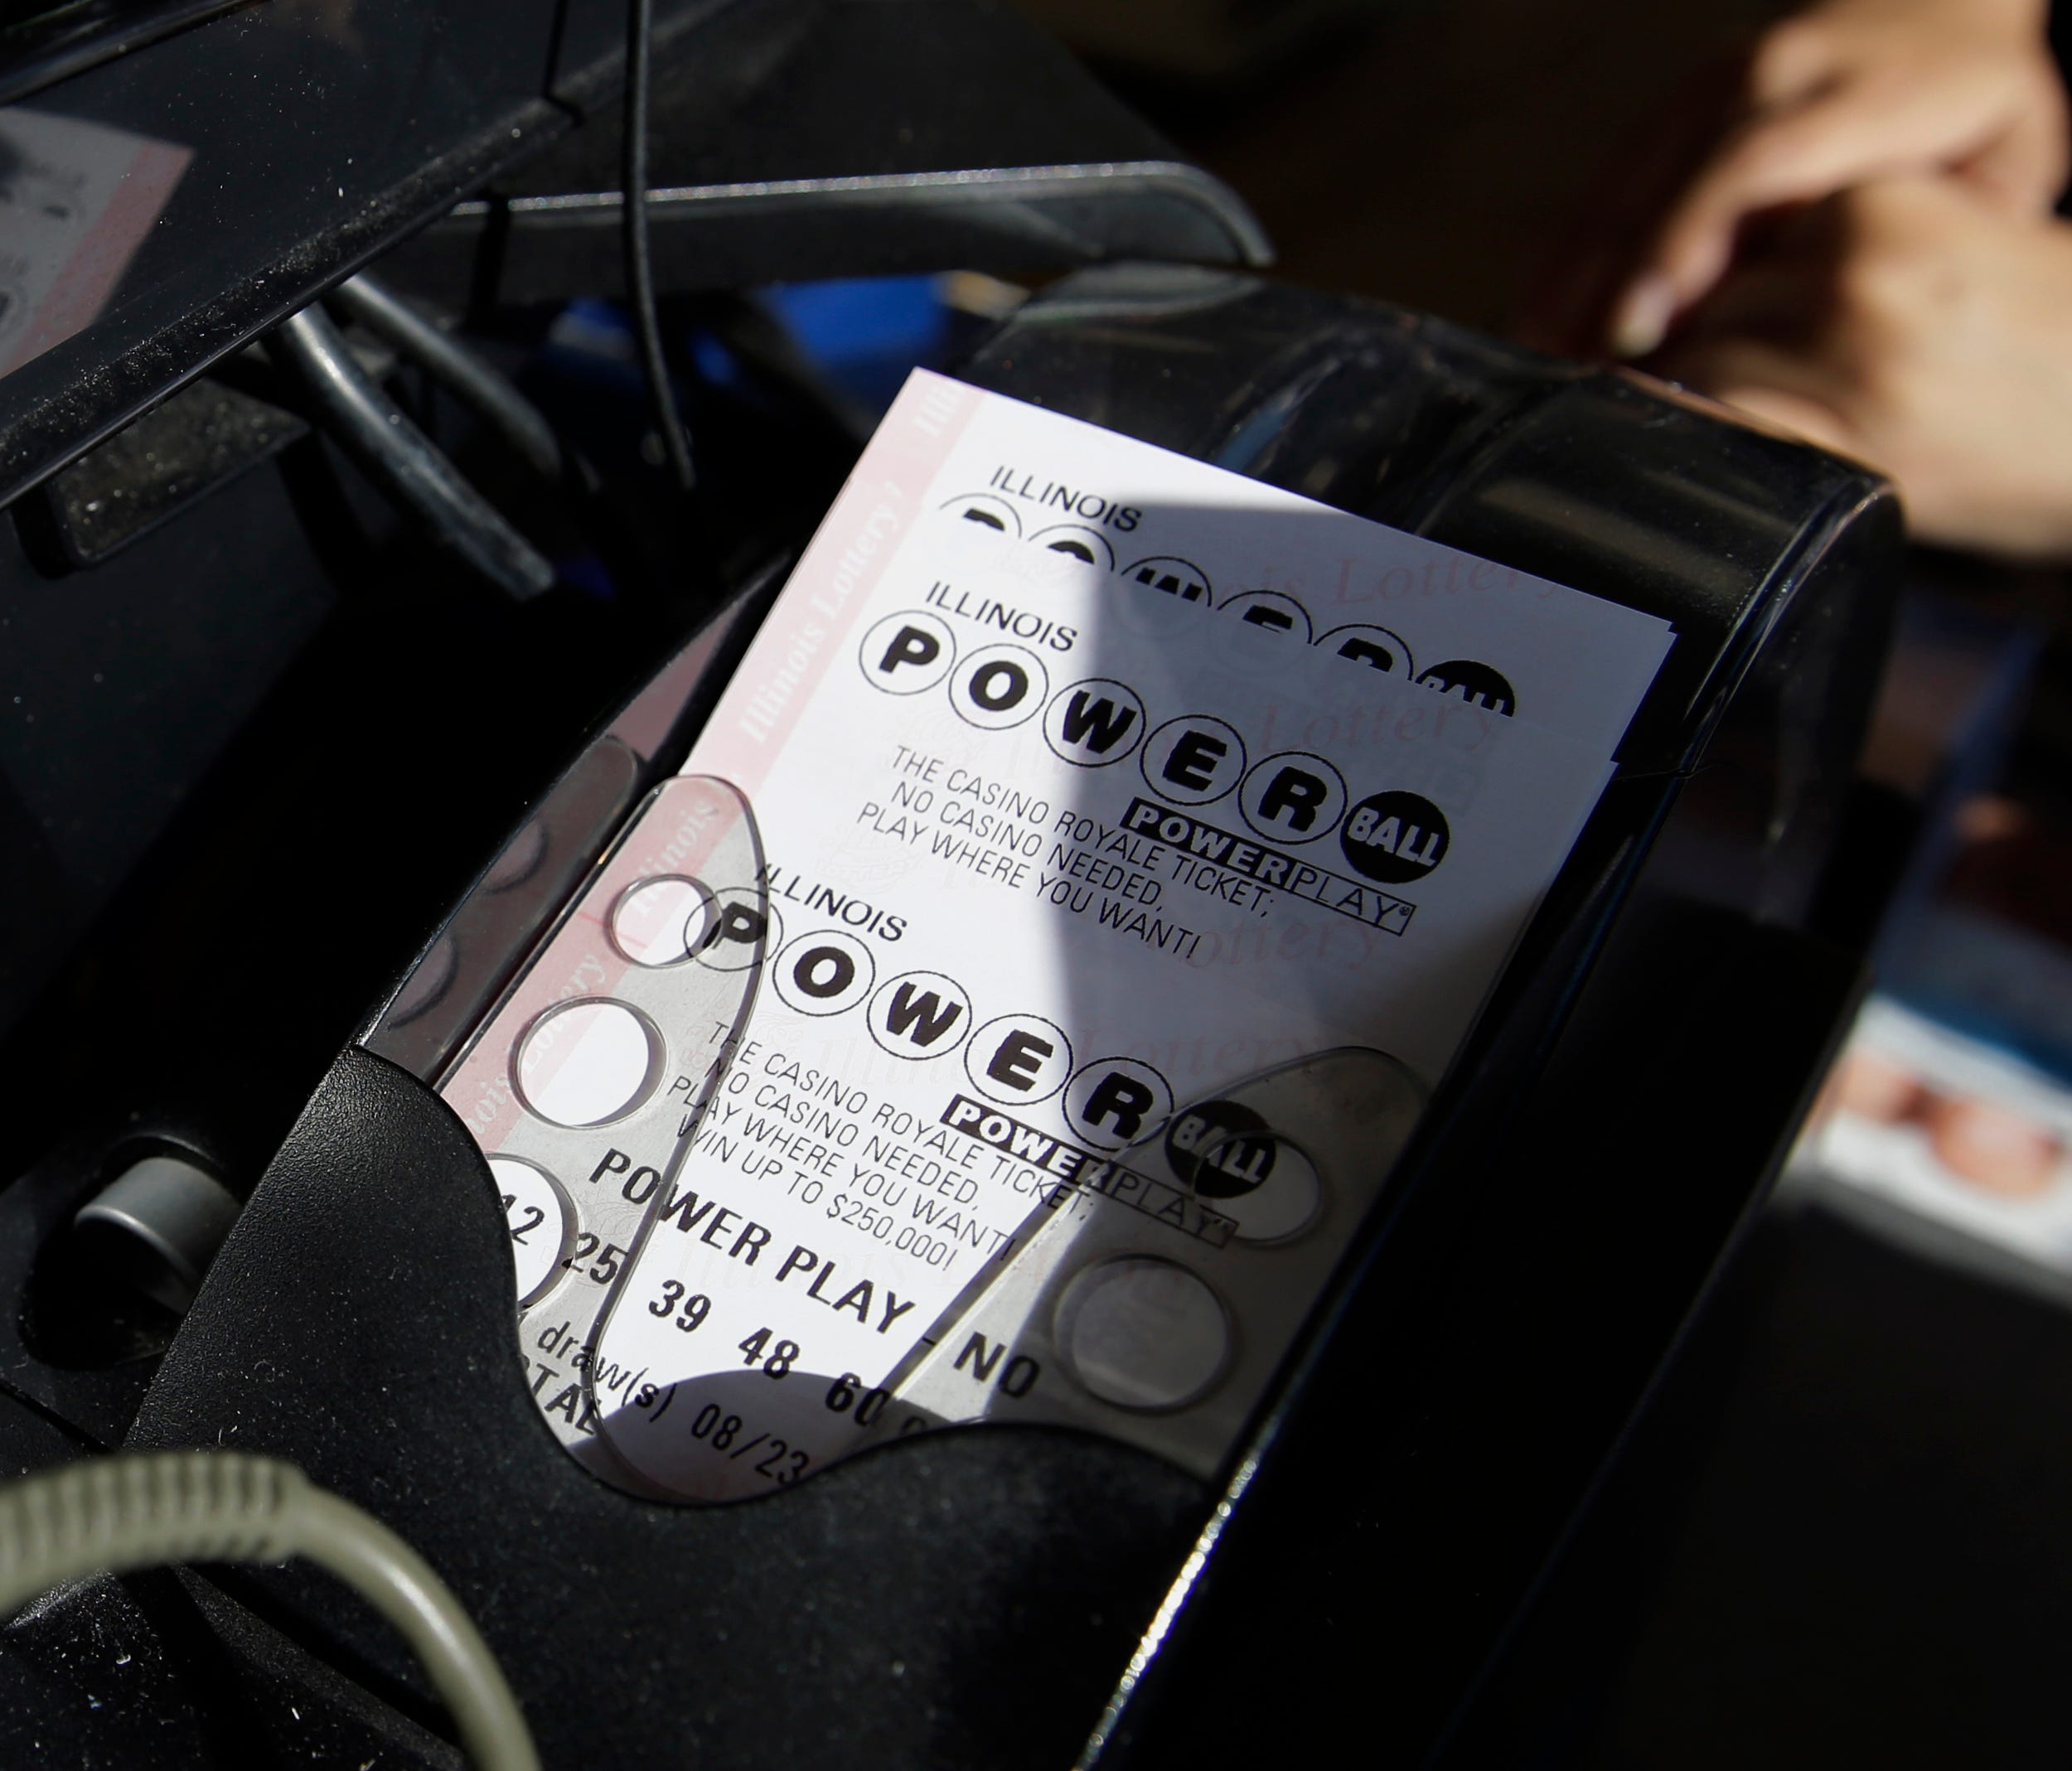 A Powerball lottery ticket is printed out of a lottery machine at a convenience store Aug. 23, 2017, in Northbrook, Ill.